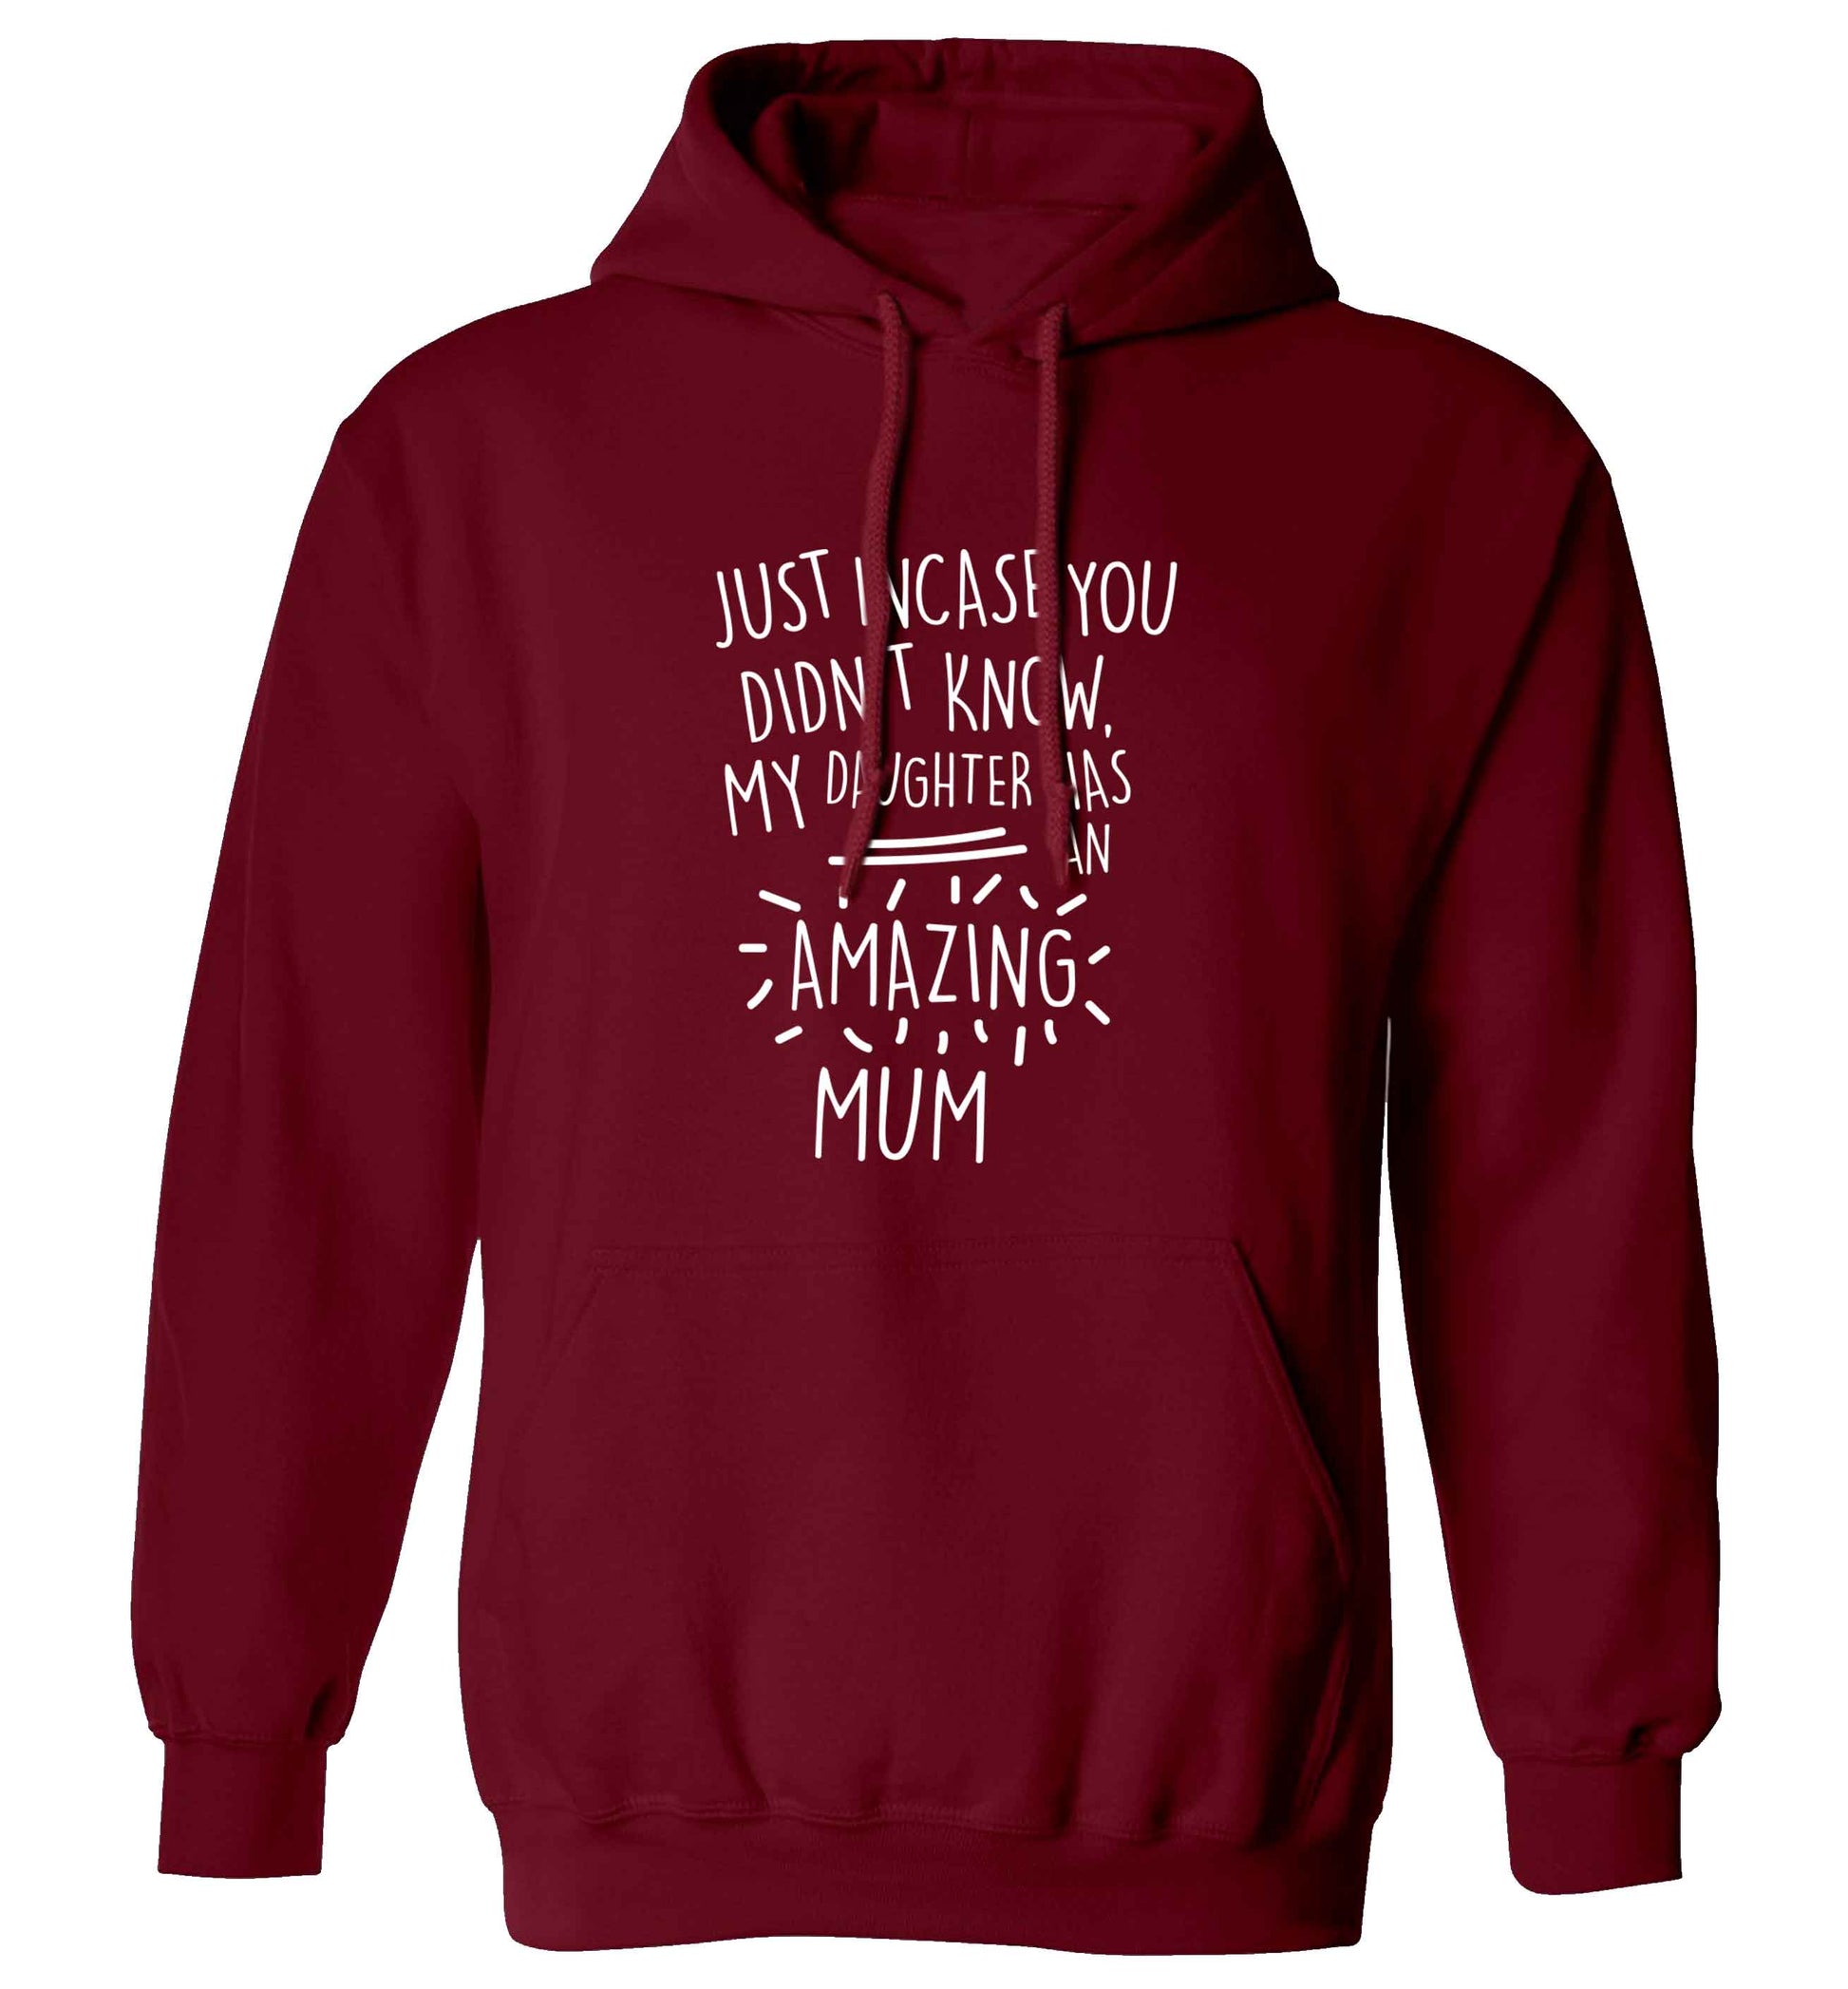 Just incase you didn't know my daughter has an amazing mum adults unisex maroon hoodie 2XL